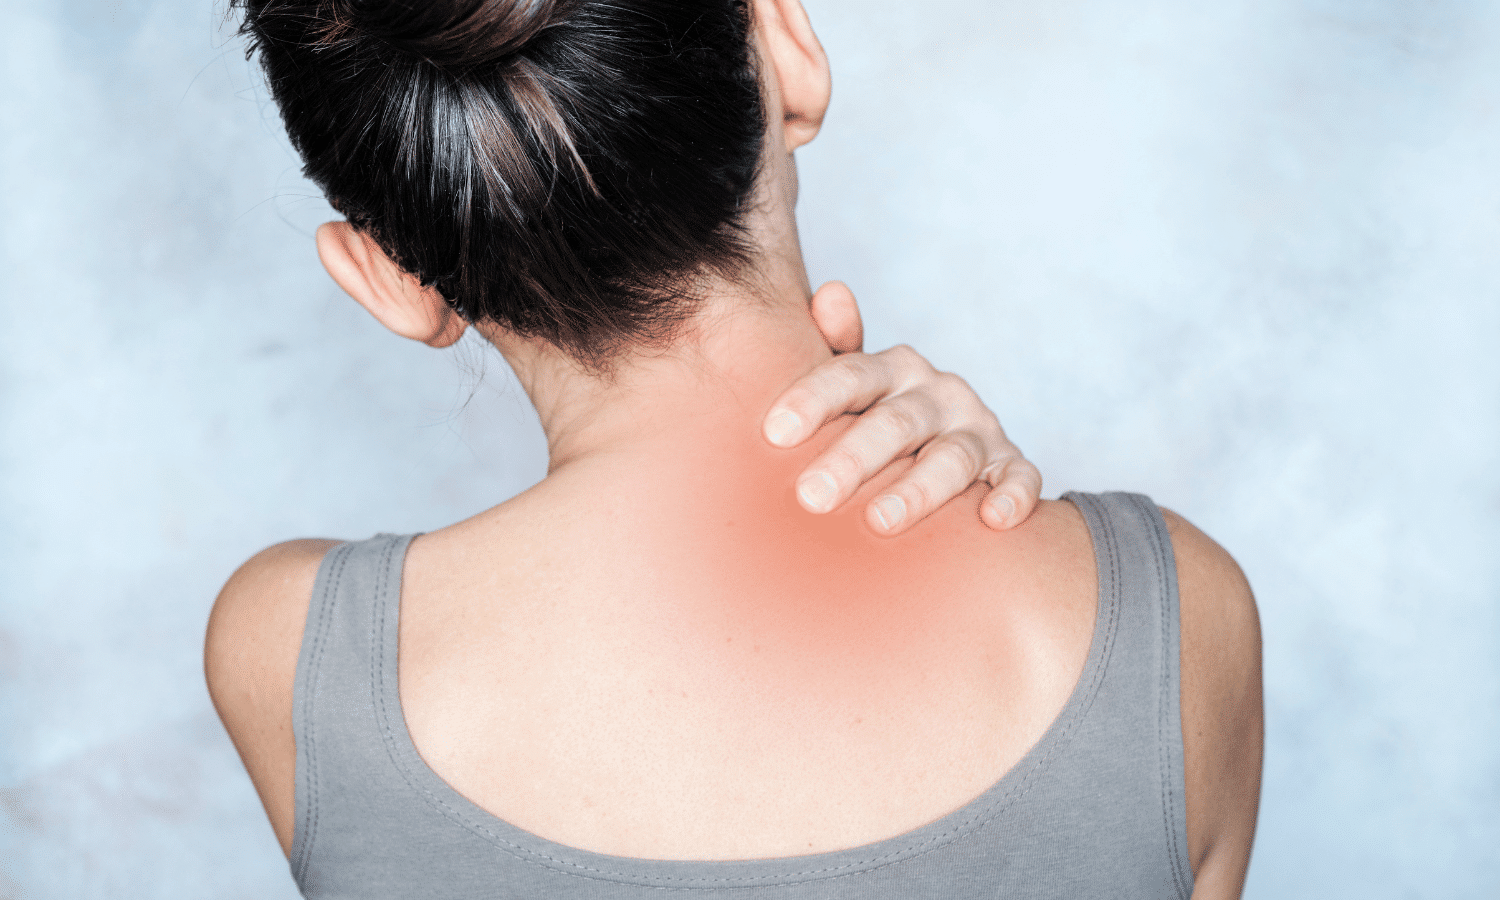 A person grabbing their shoulder and neck area due to pain from a Trigger Point